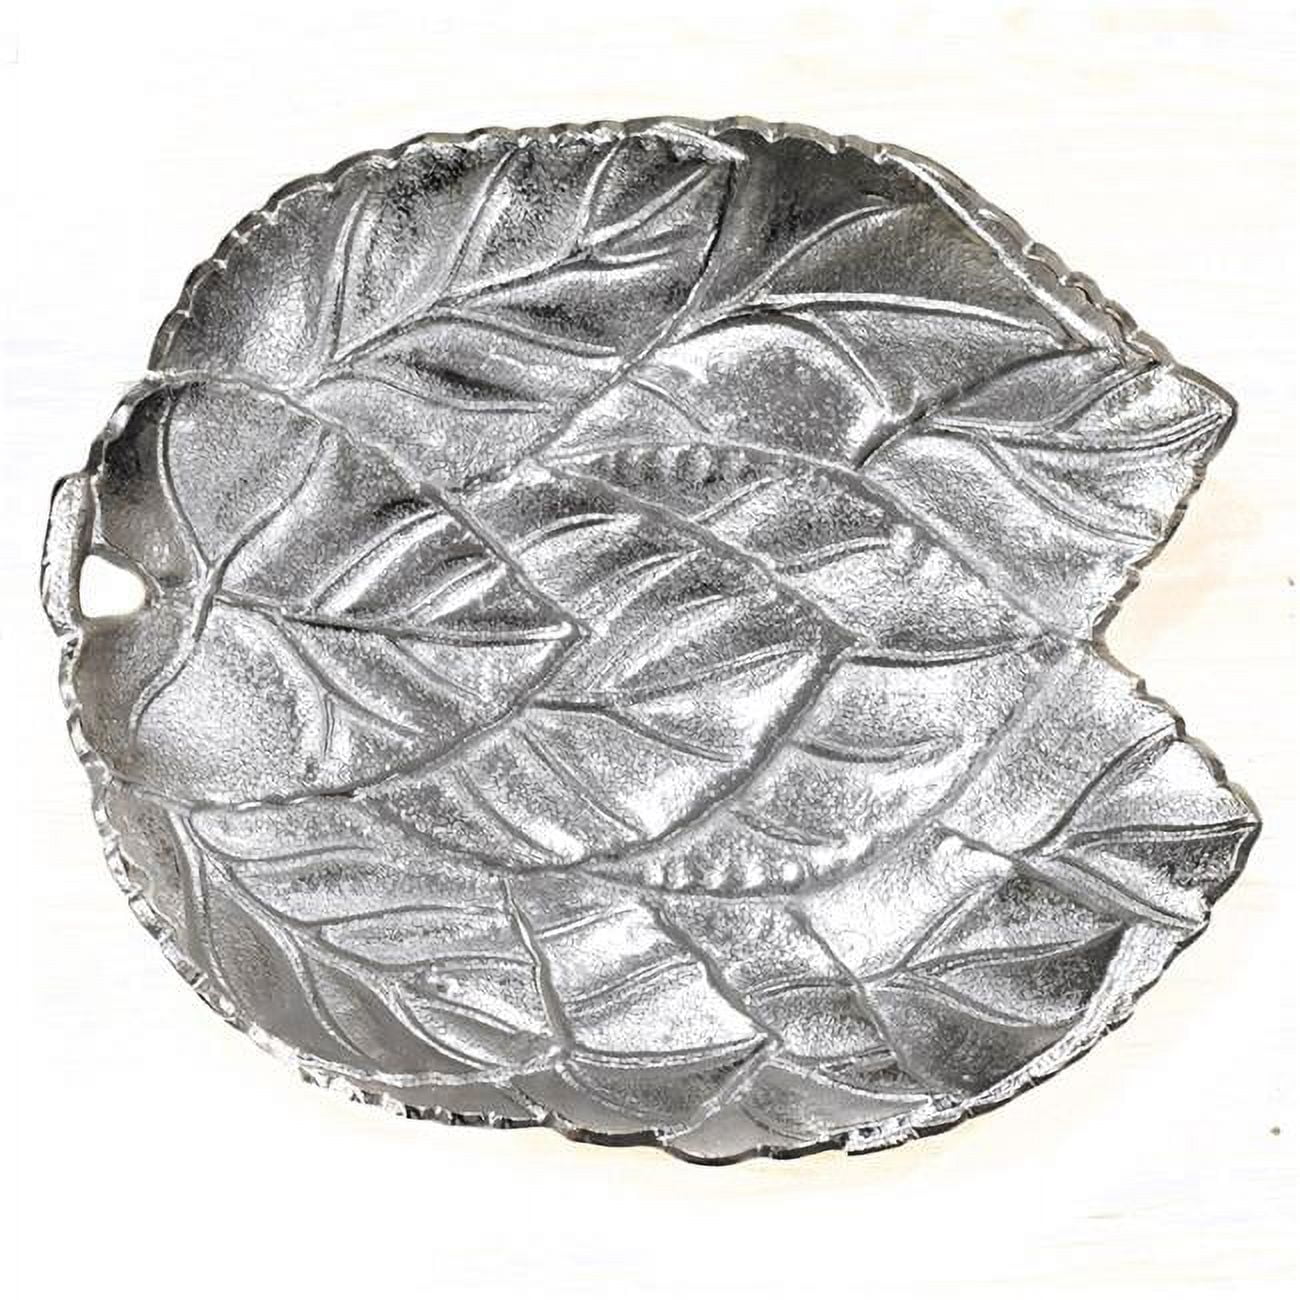 Picture of BBH Homes UBBBVK030AB2020BSC1HS 14.96 x 12.99 x 2.36 in. Handmade Silver Coated Decorative Aluminum Tray